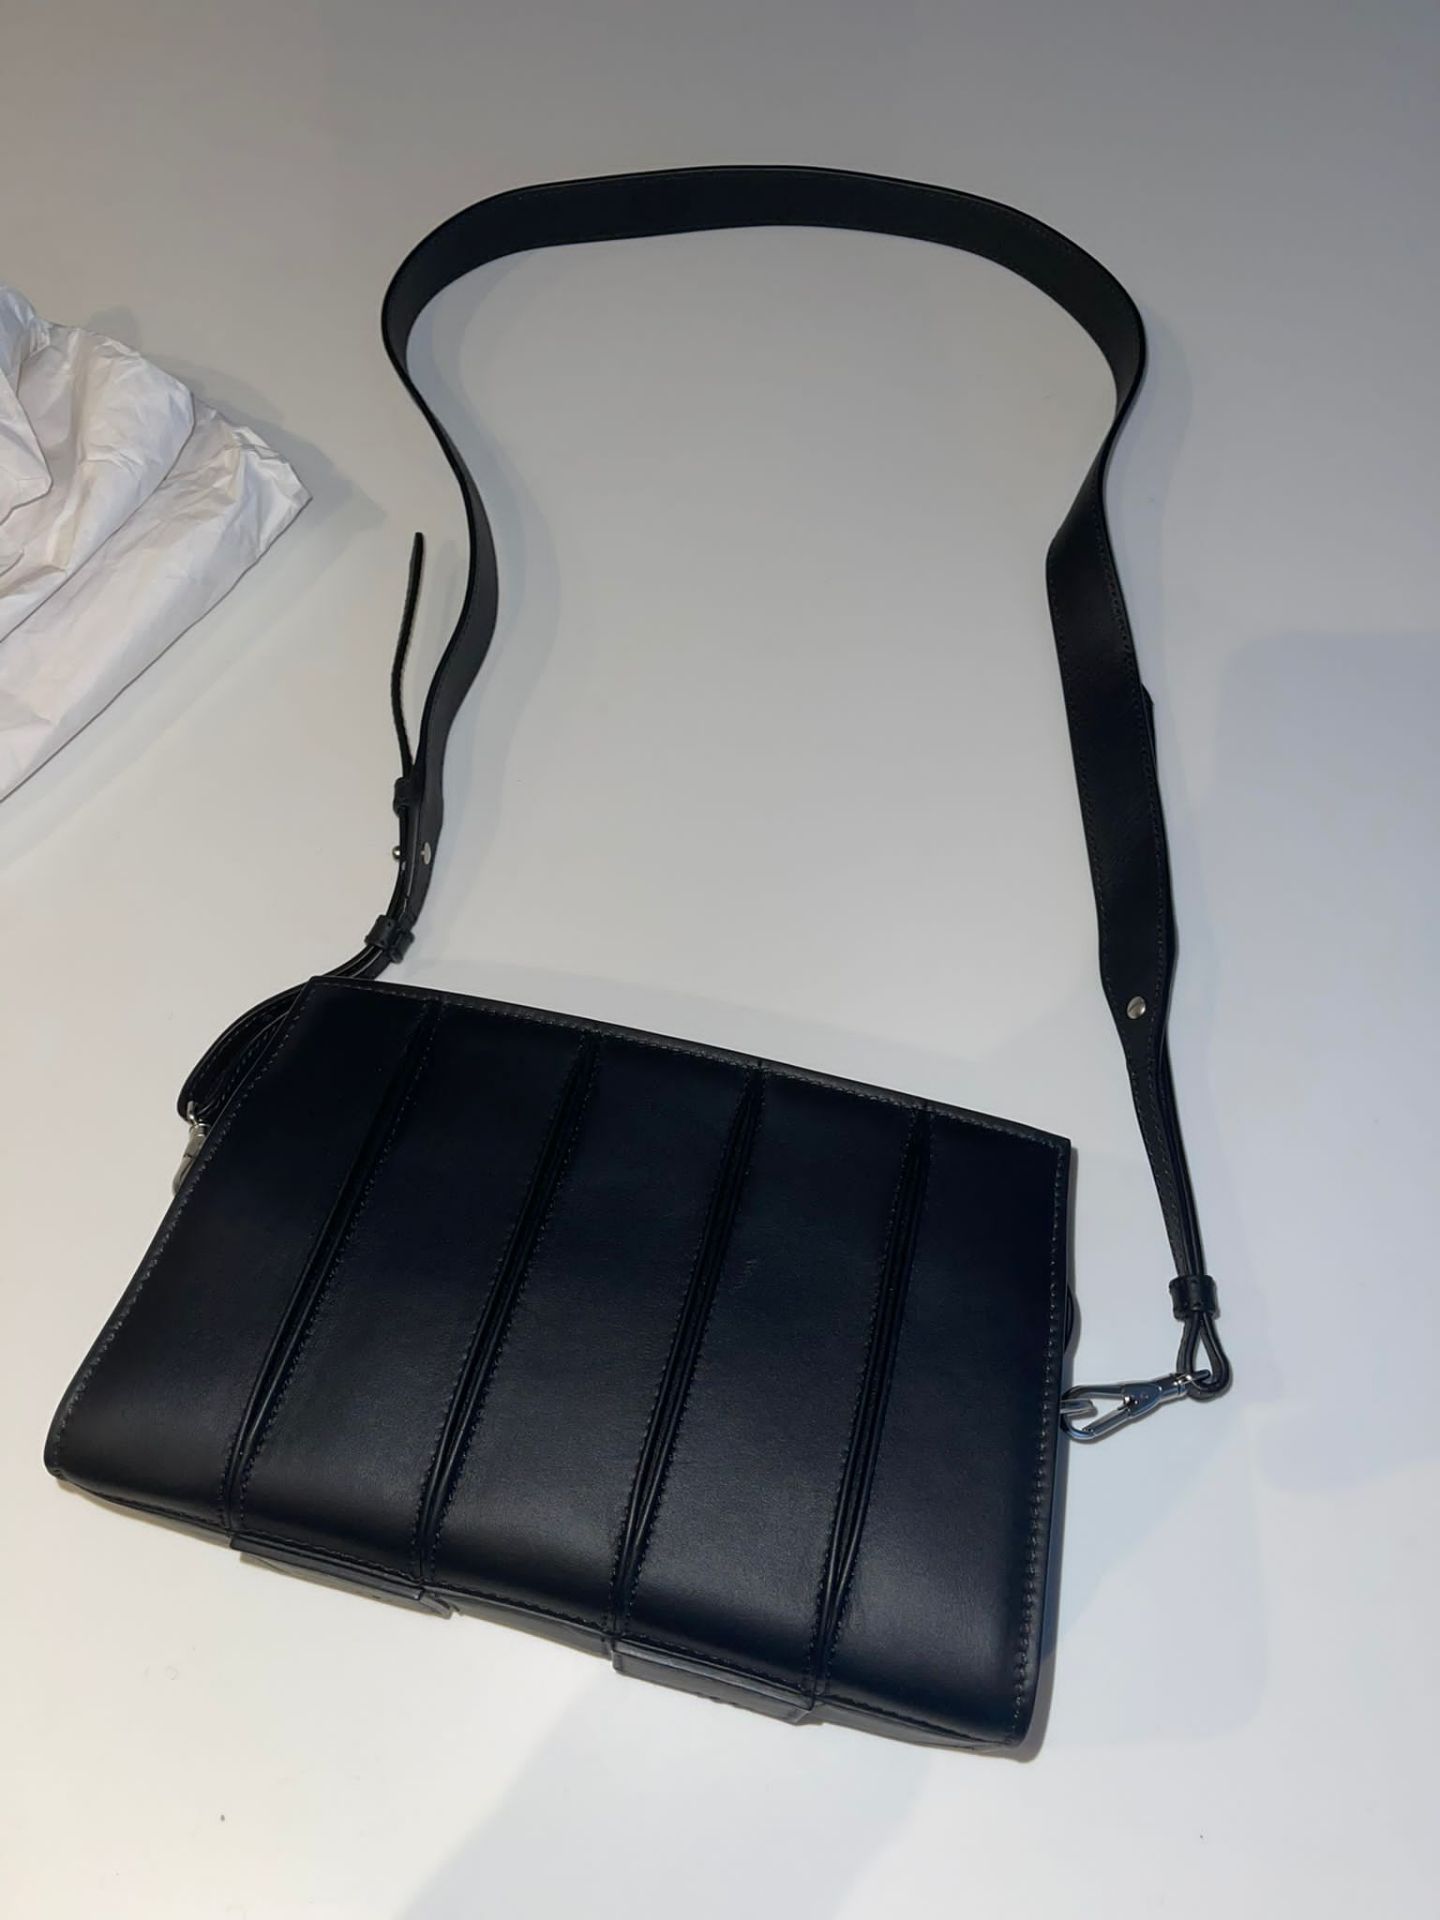 Max Mara Whitney Small Black Handbag. RRP £625. Complete your outfit with this smart & elegeant - Image 2 of 3